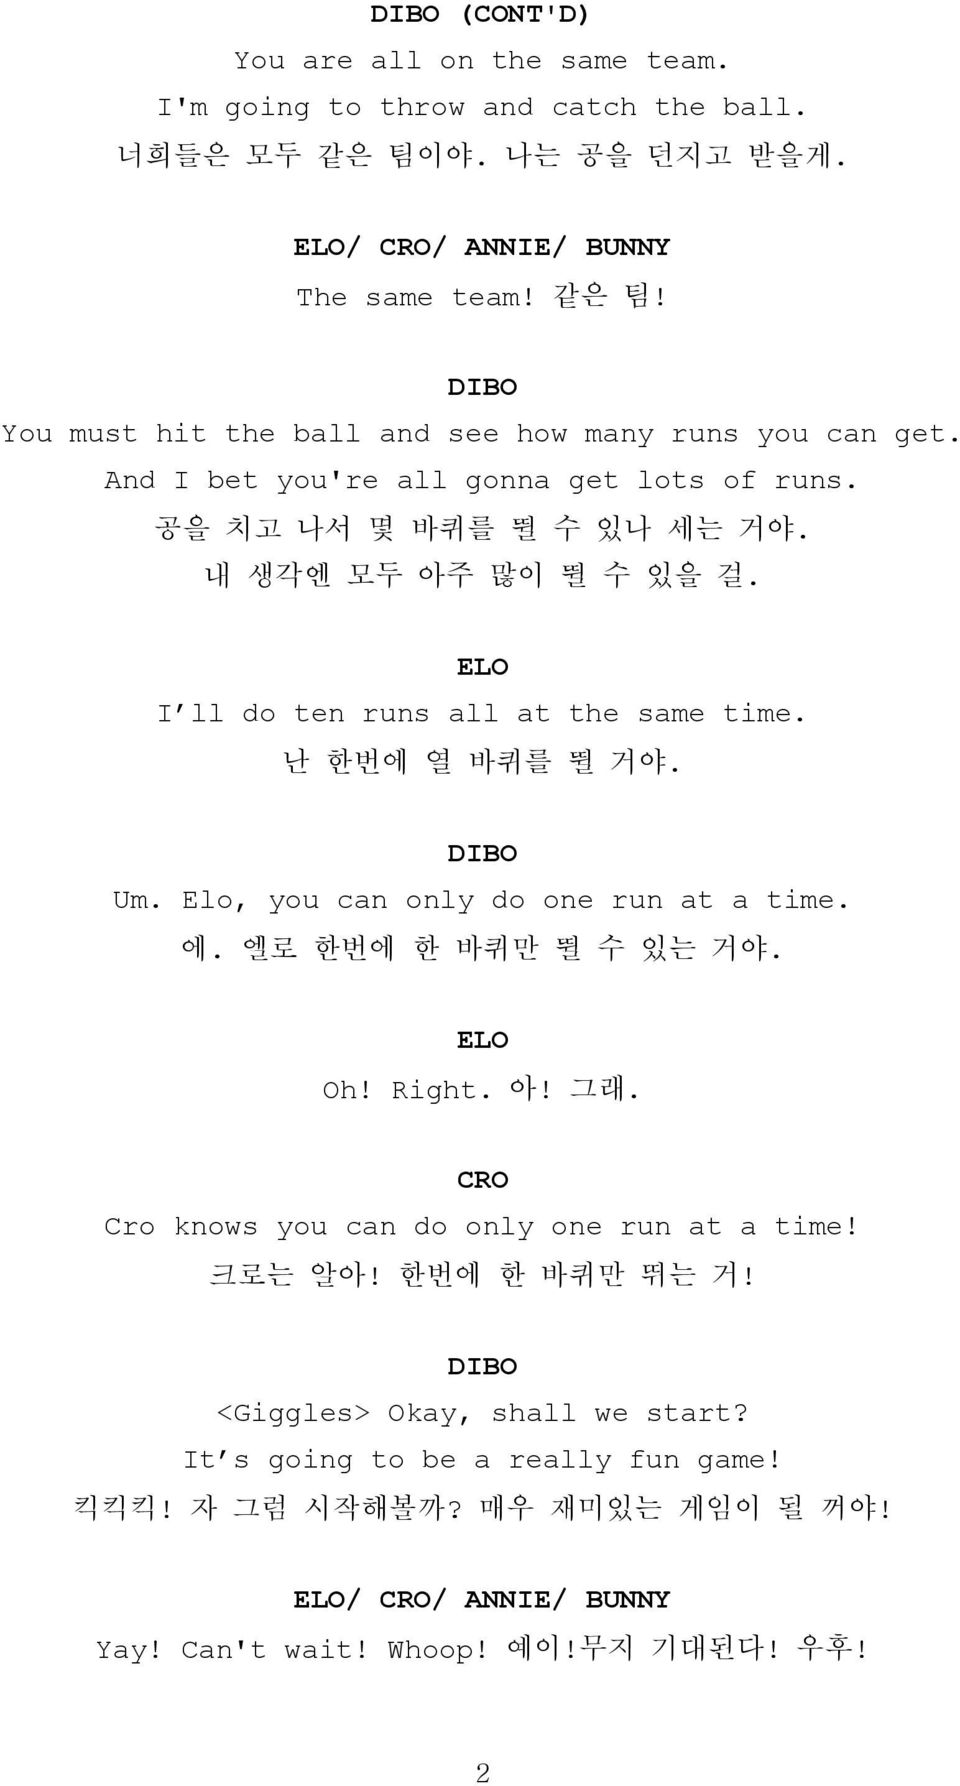 Elo, you can only do one run at a time. 에. 엘로 한번에 한 바퀴만 뛸 수 있는 거야. Oh! Right. 아! 그래. Cro knows you can do only one run at a time! 크로는 알아! 한번에 한 바퀴만 뛰는 거!